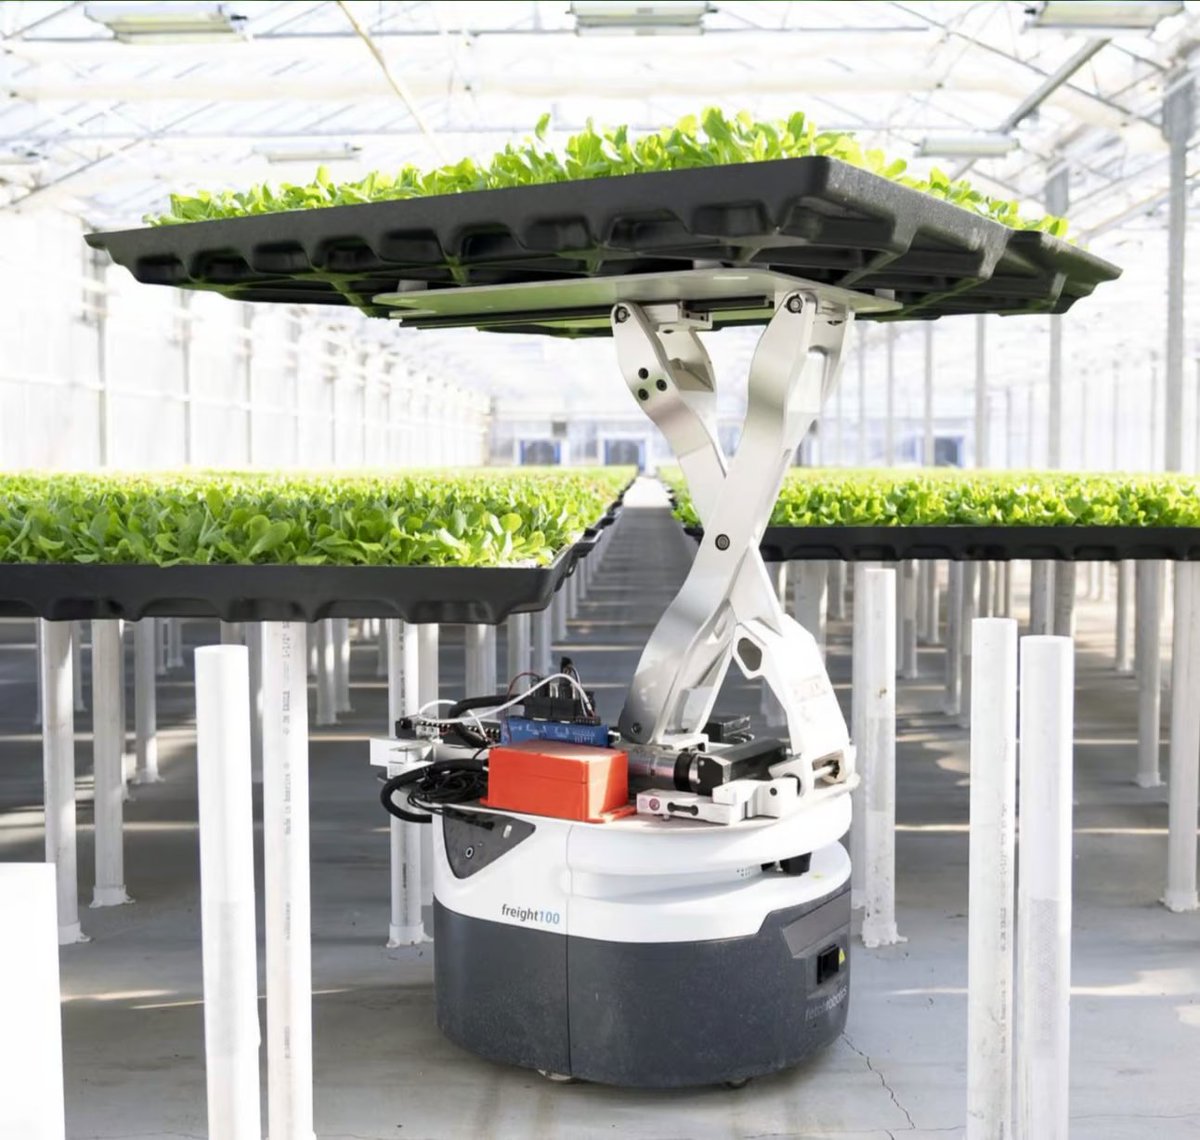 7. Hippo Harvest

- Raised $21M recently
- Building robots for indoor farming